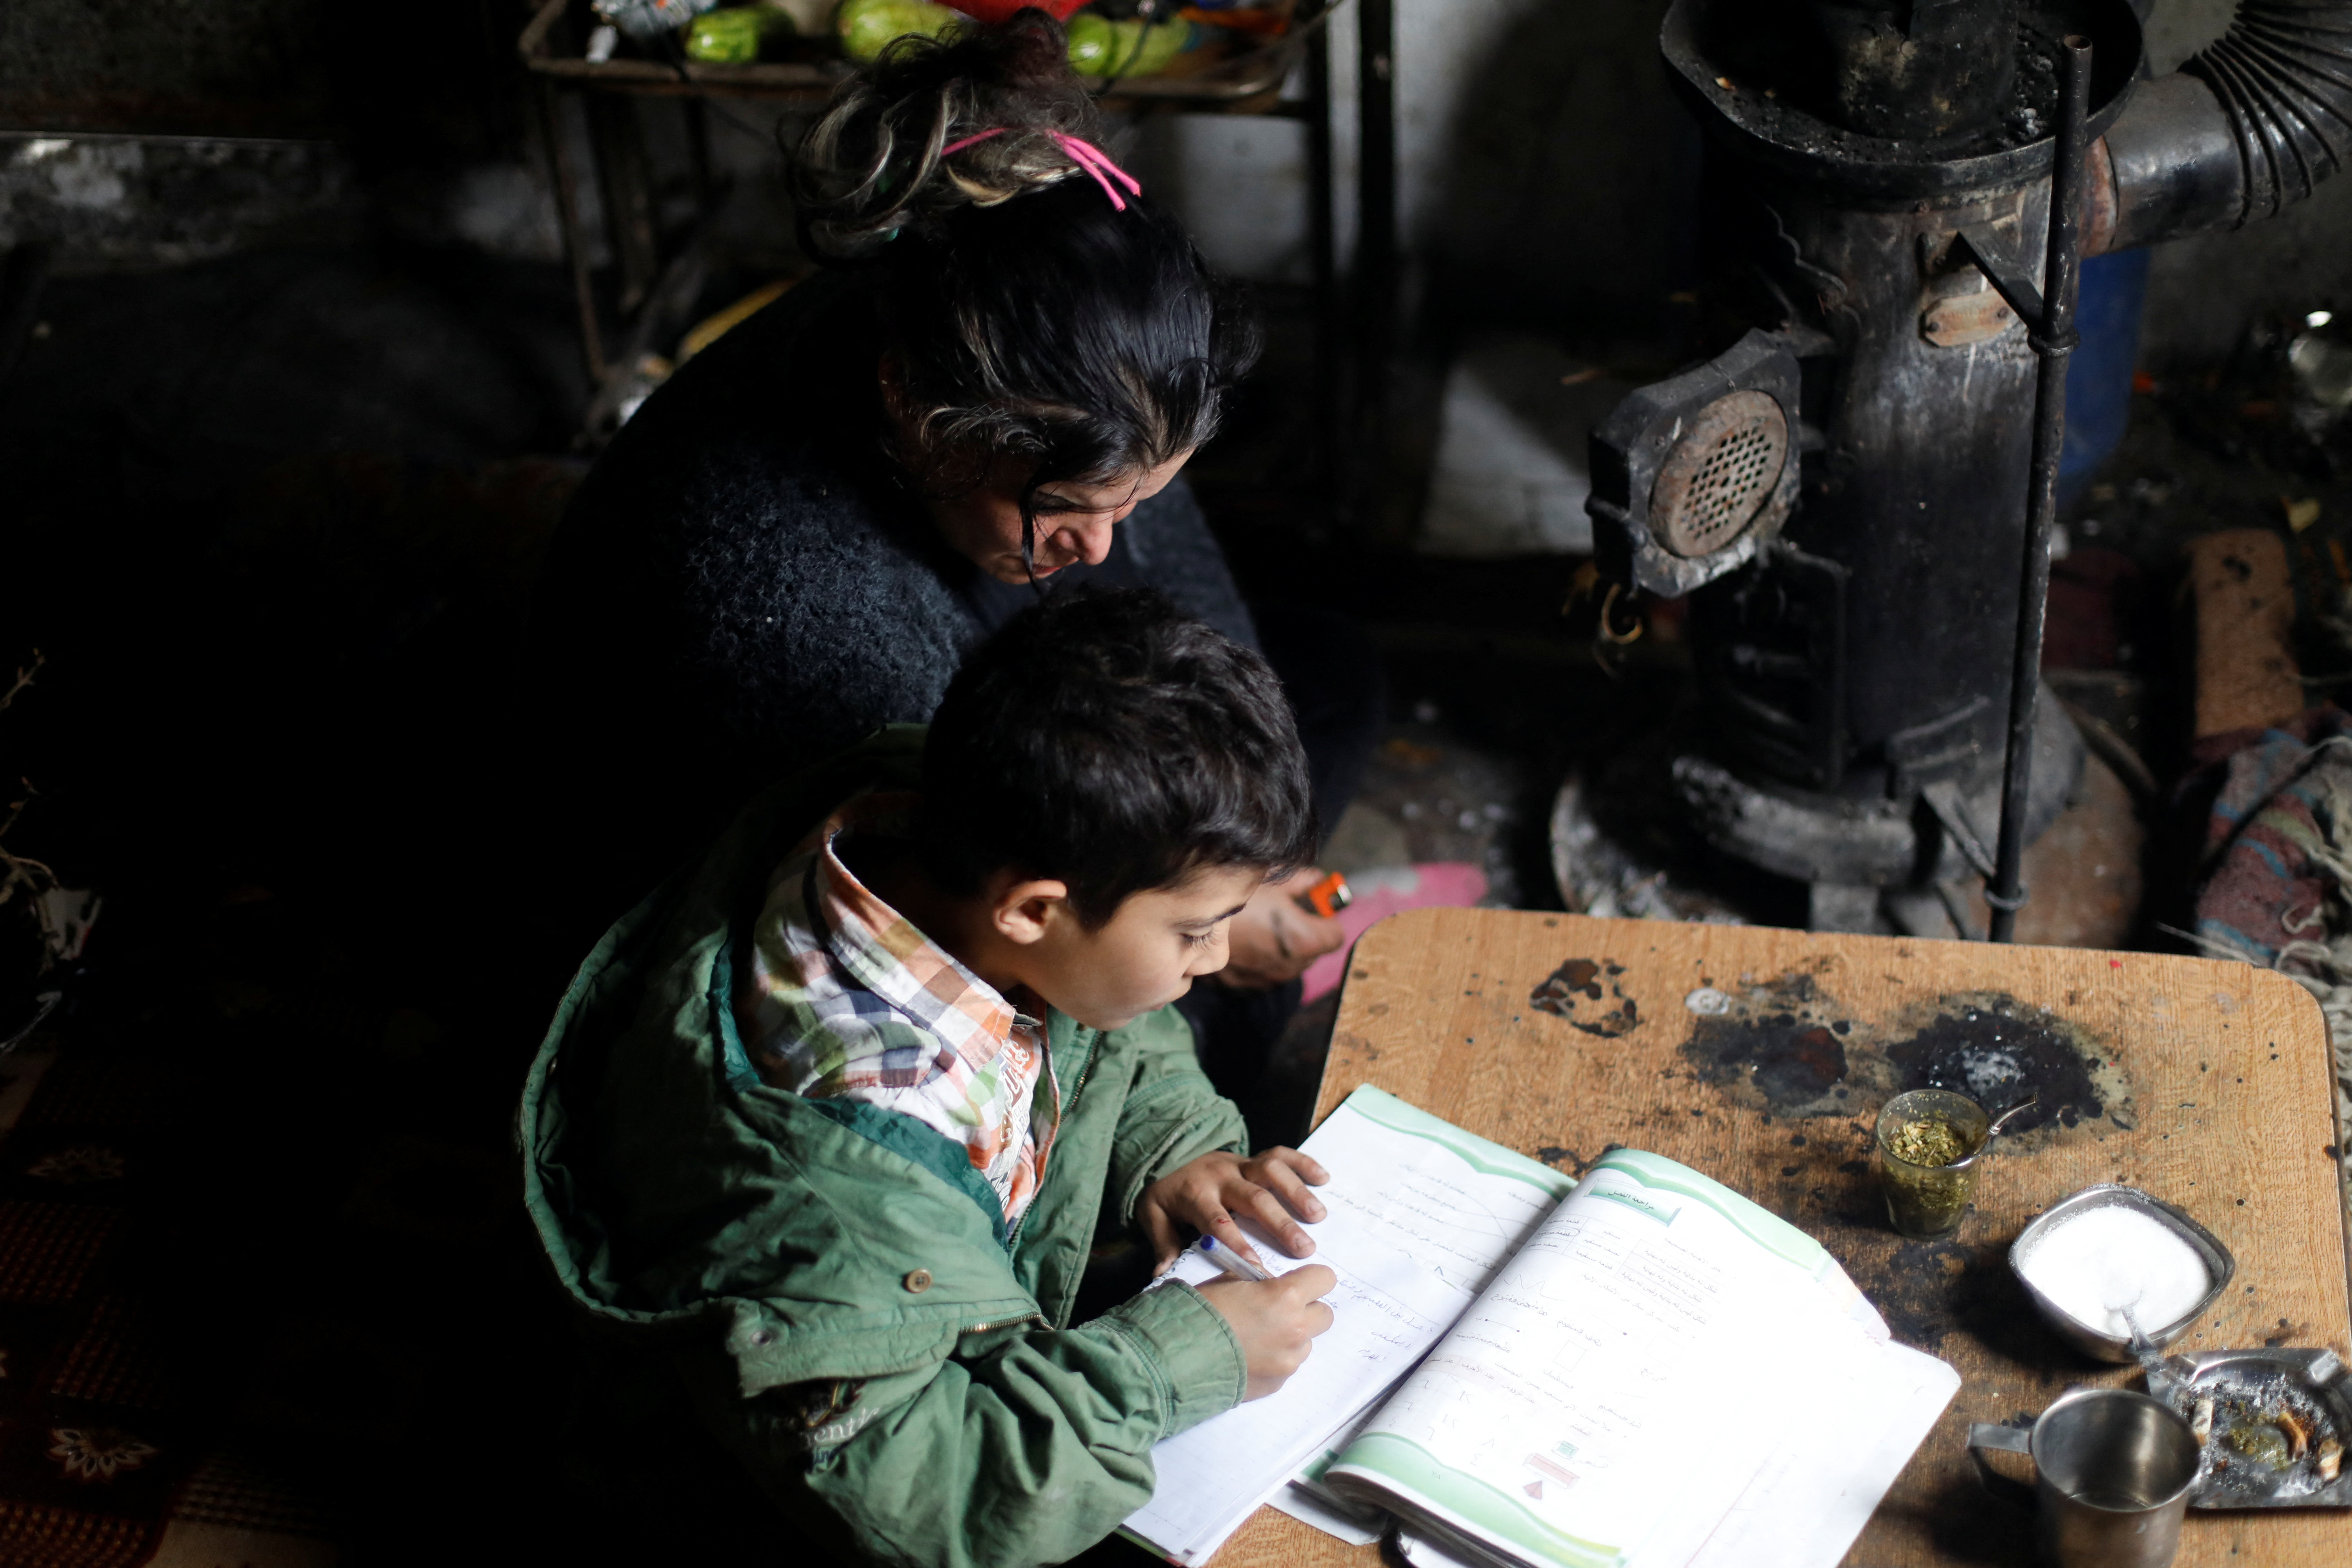 Ahlam Mohsin Warda helps her son with his studies at their home in Damascus